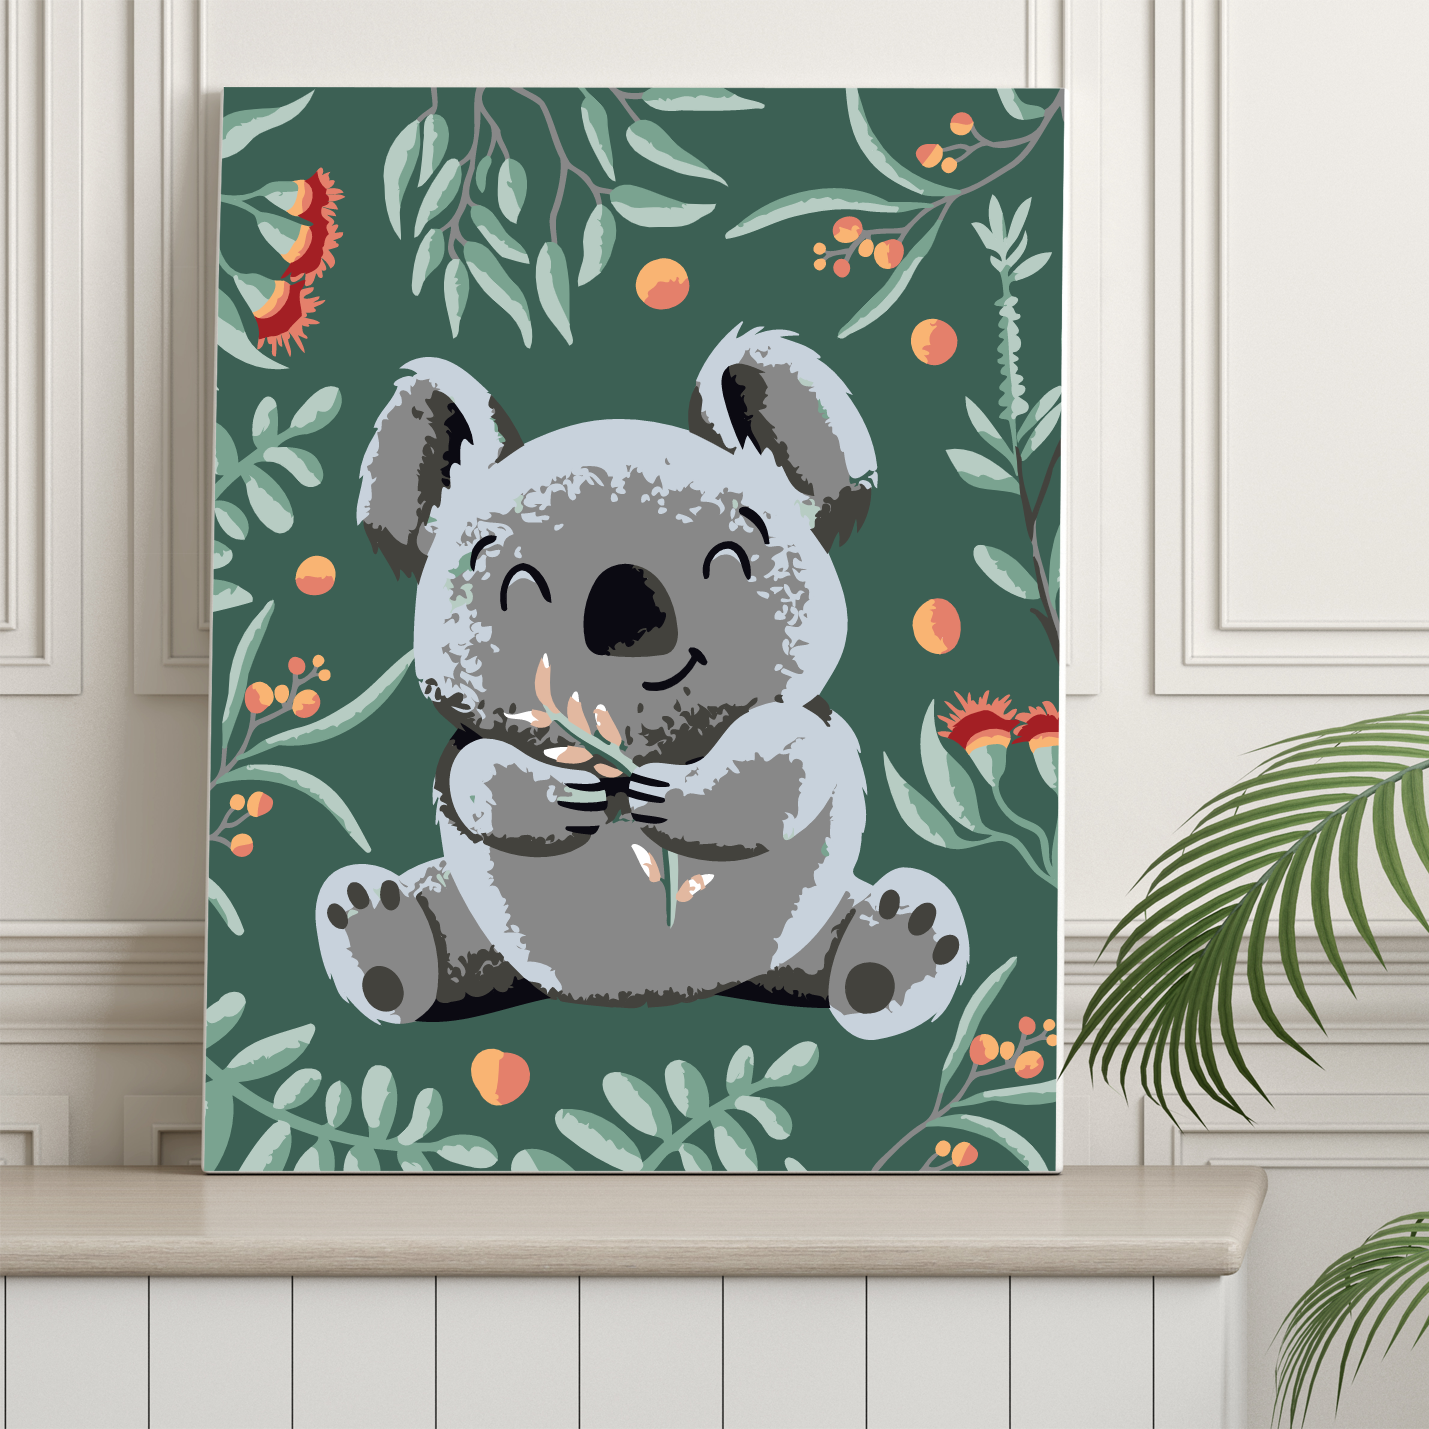 40x50cm Paint by Numbers Kit: Koala's Tranquil Haven: Cute Koala Seated Among Leaves